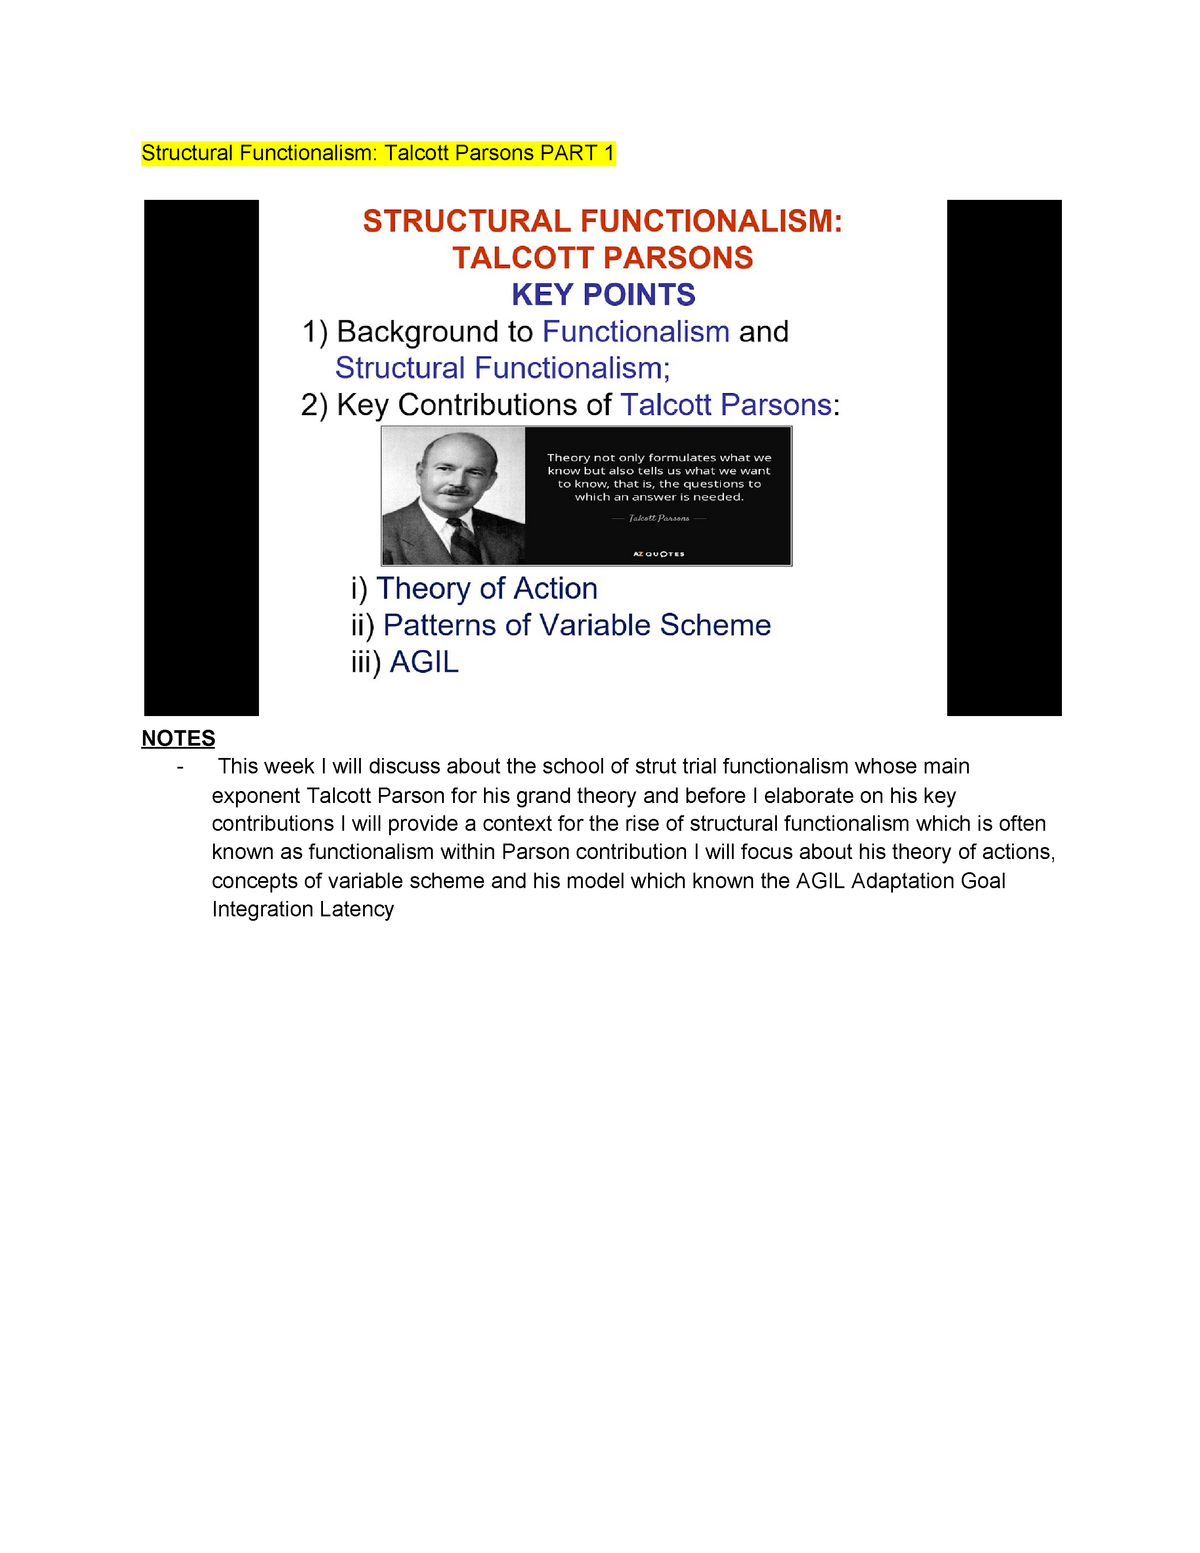 talcott parsons structural functionalism theory